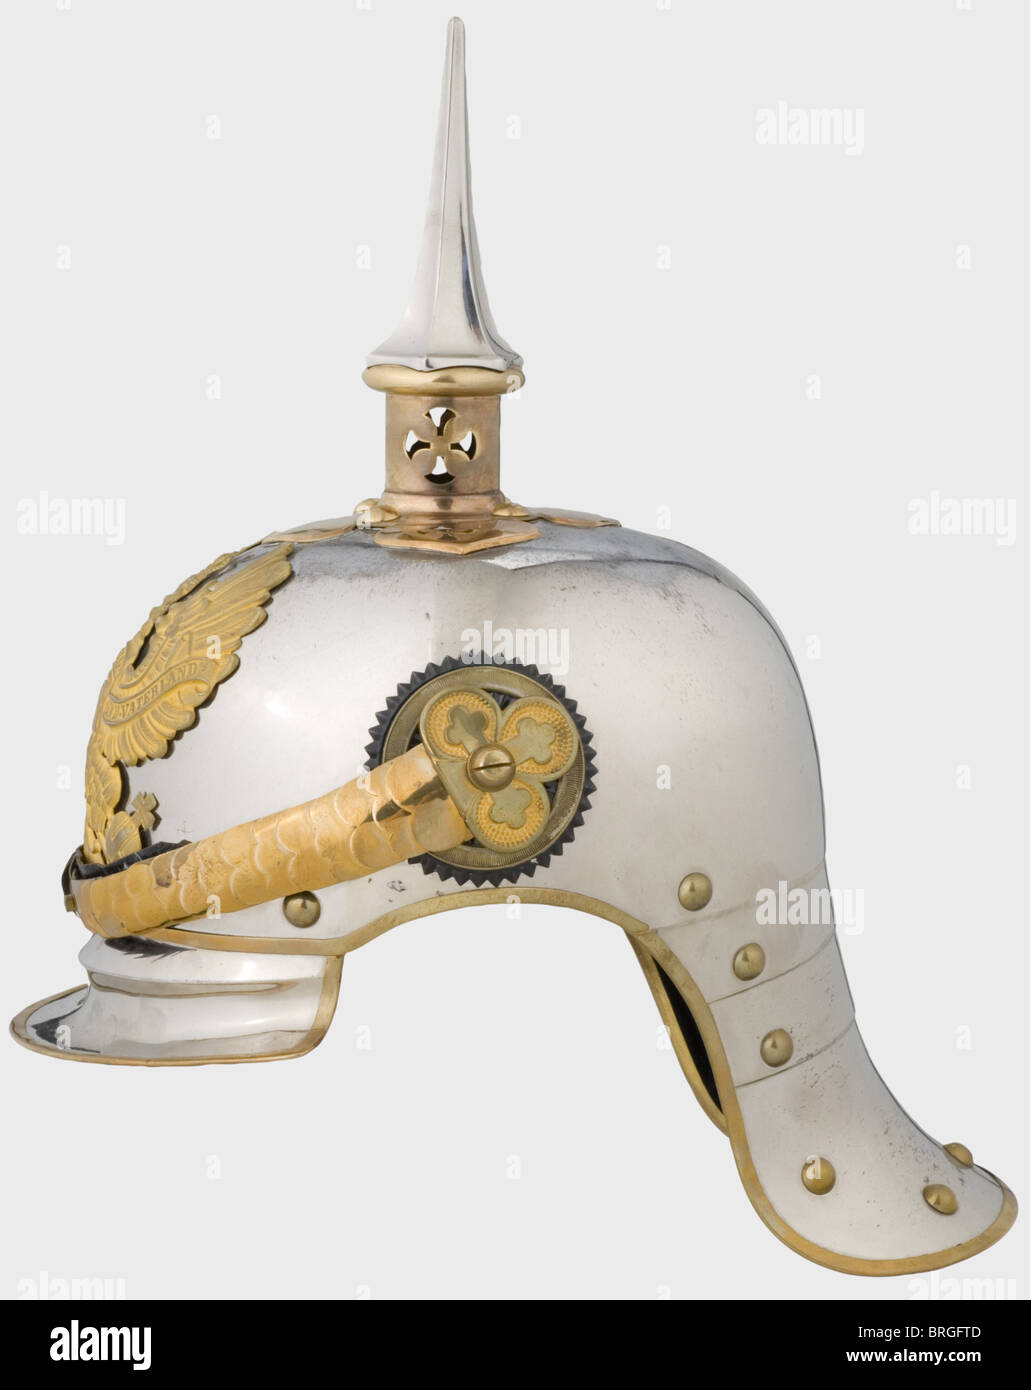 A helmet for officers,of the 3rd,4th,5th,7th and 8th Prussian Cuirassier Line Regiments Nickel-plated,steel skull with gilded tombac mountings,long neck protector with lames indicated,and fluted brim. Eagle for regiments of the line with frosted gilding. Beige ribbed silk lining with the owner's monogram 'B' under a count's coronet. Rear brim lined with black velvet. With the carrying case. The nickel-plating on the skull is somewhat lusterless on top,otherwise an imposing helmet.,historic,historical,19th century,Prussian,Prussia,German,Germany,,Additional-Rights-Clearences-Not Available Stock Photo